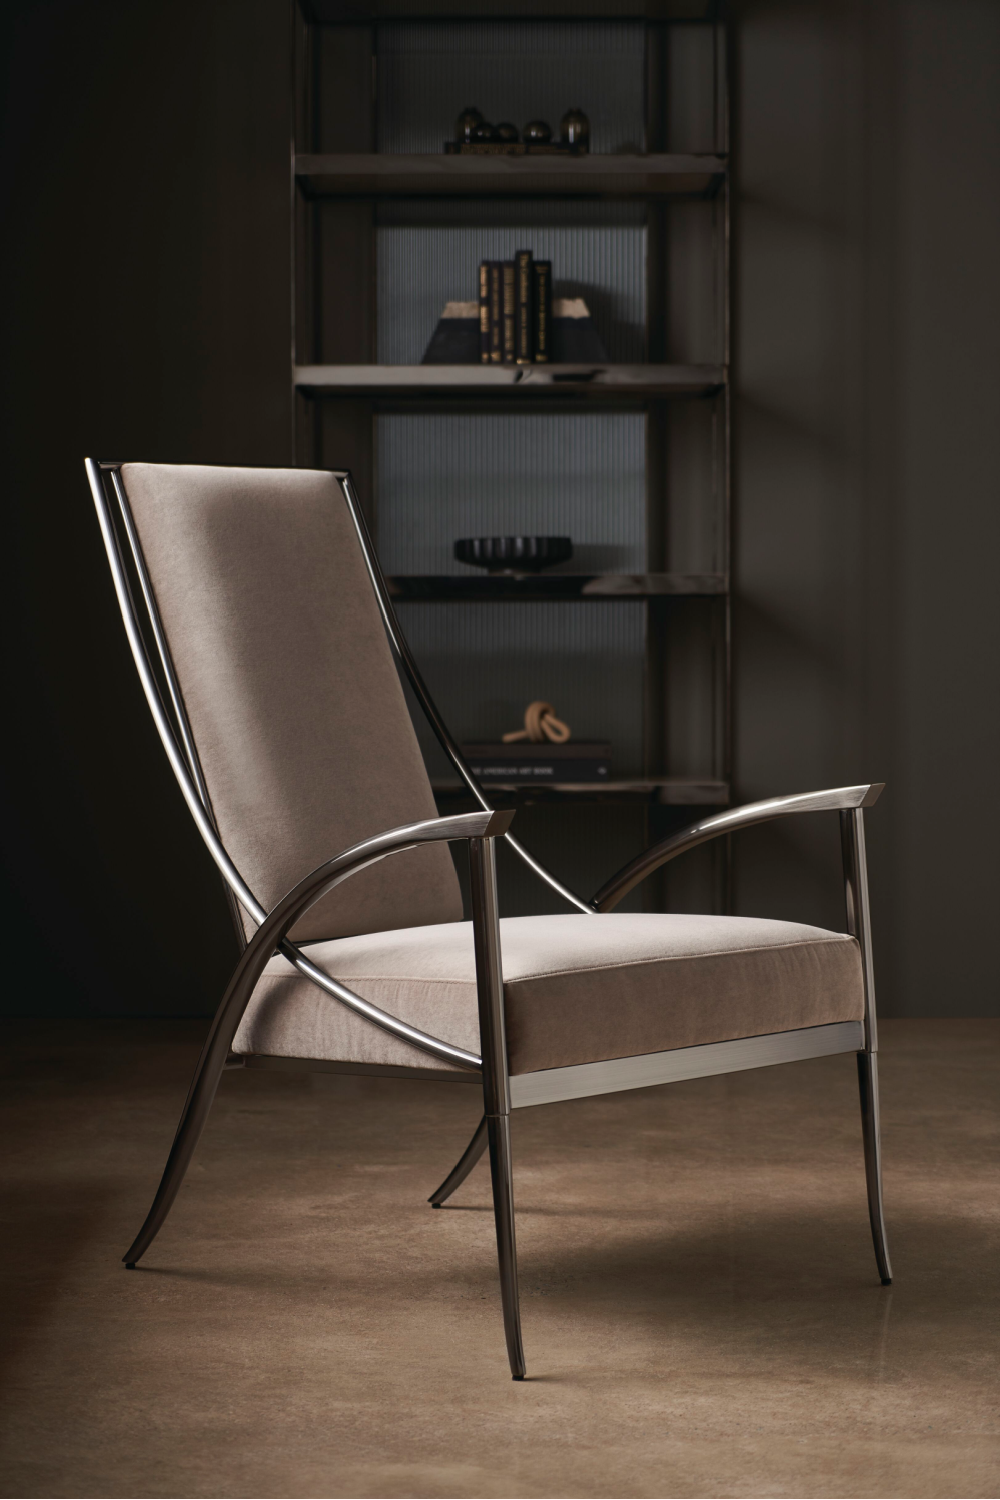 Smoked Stainless Steel Armchair | Caracole Mantis | Oroa.com